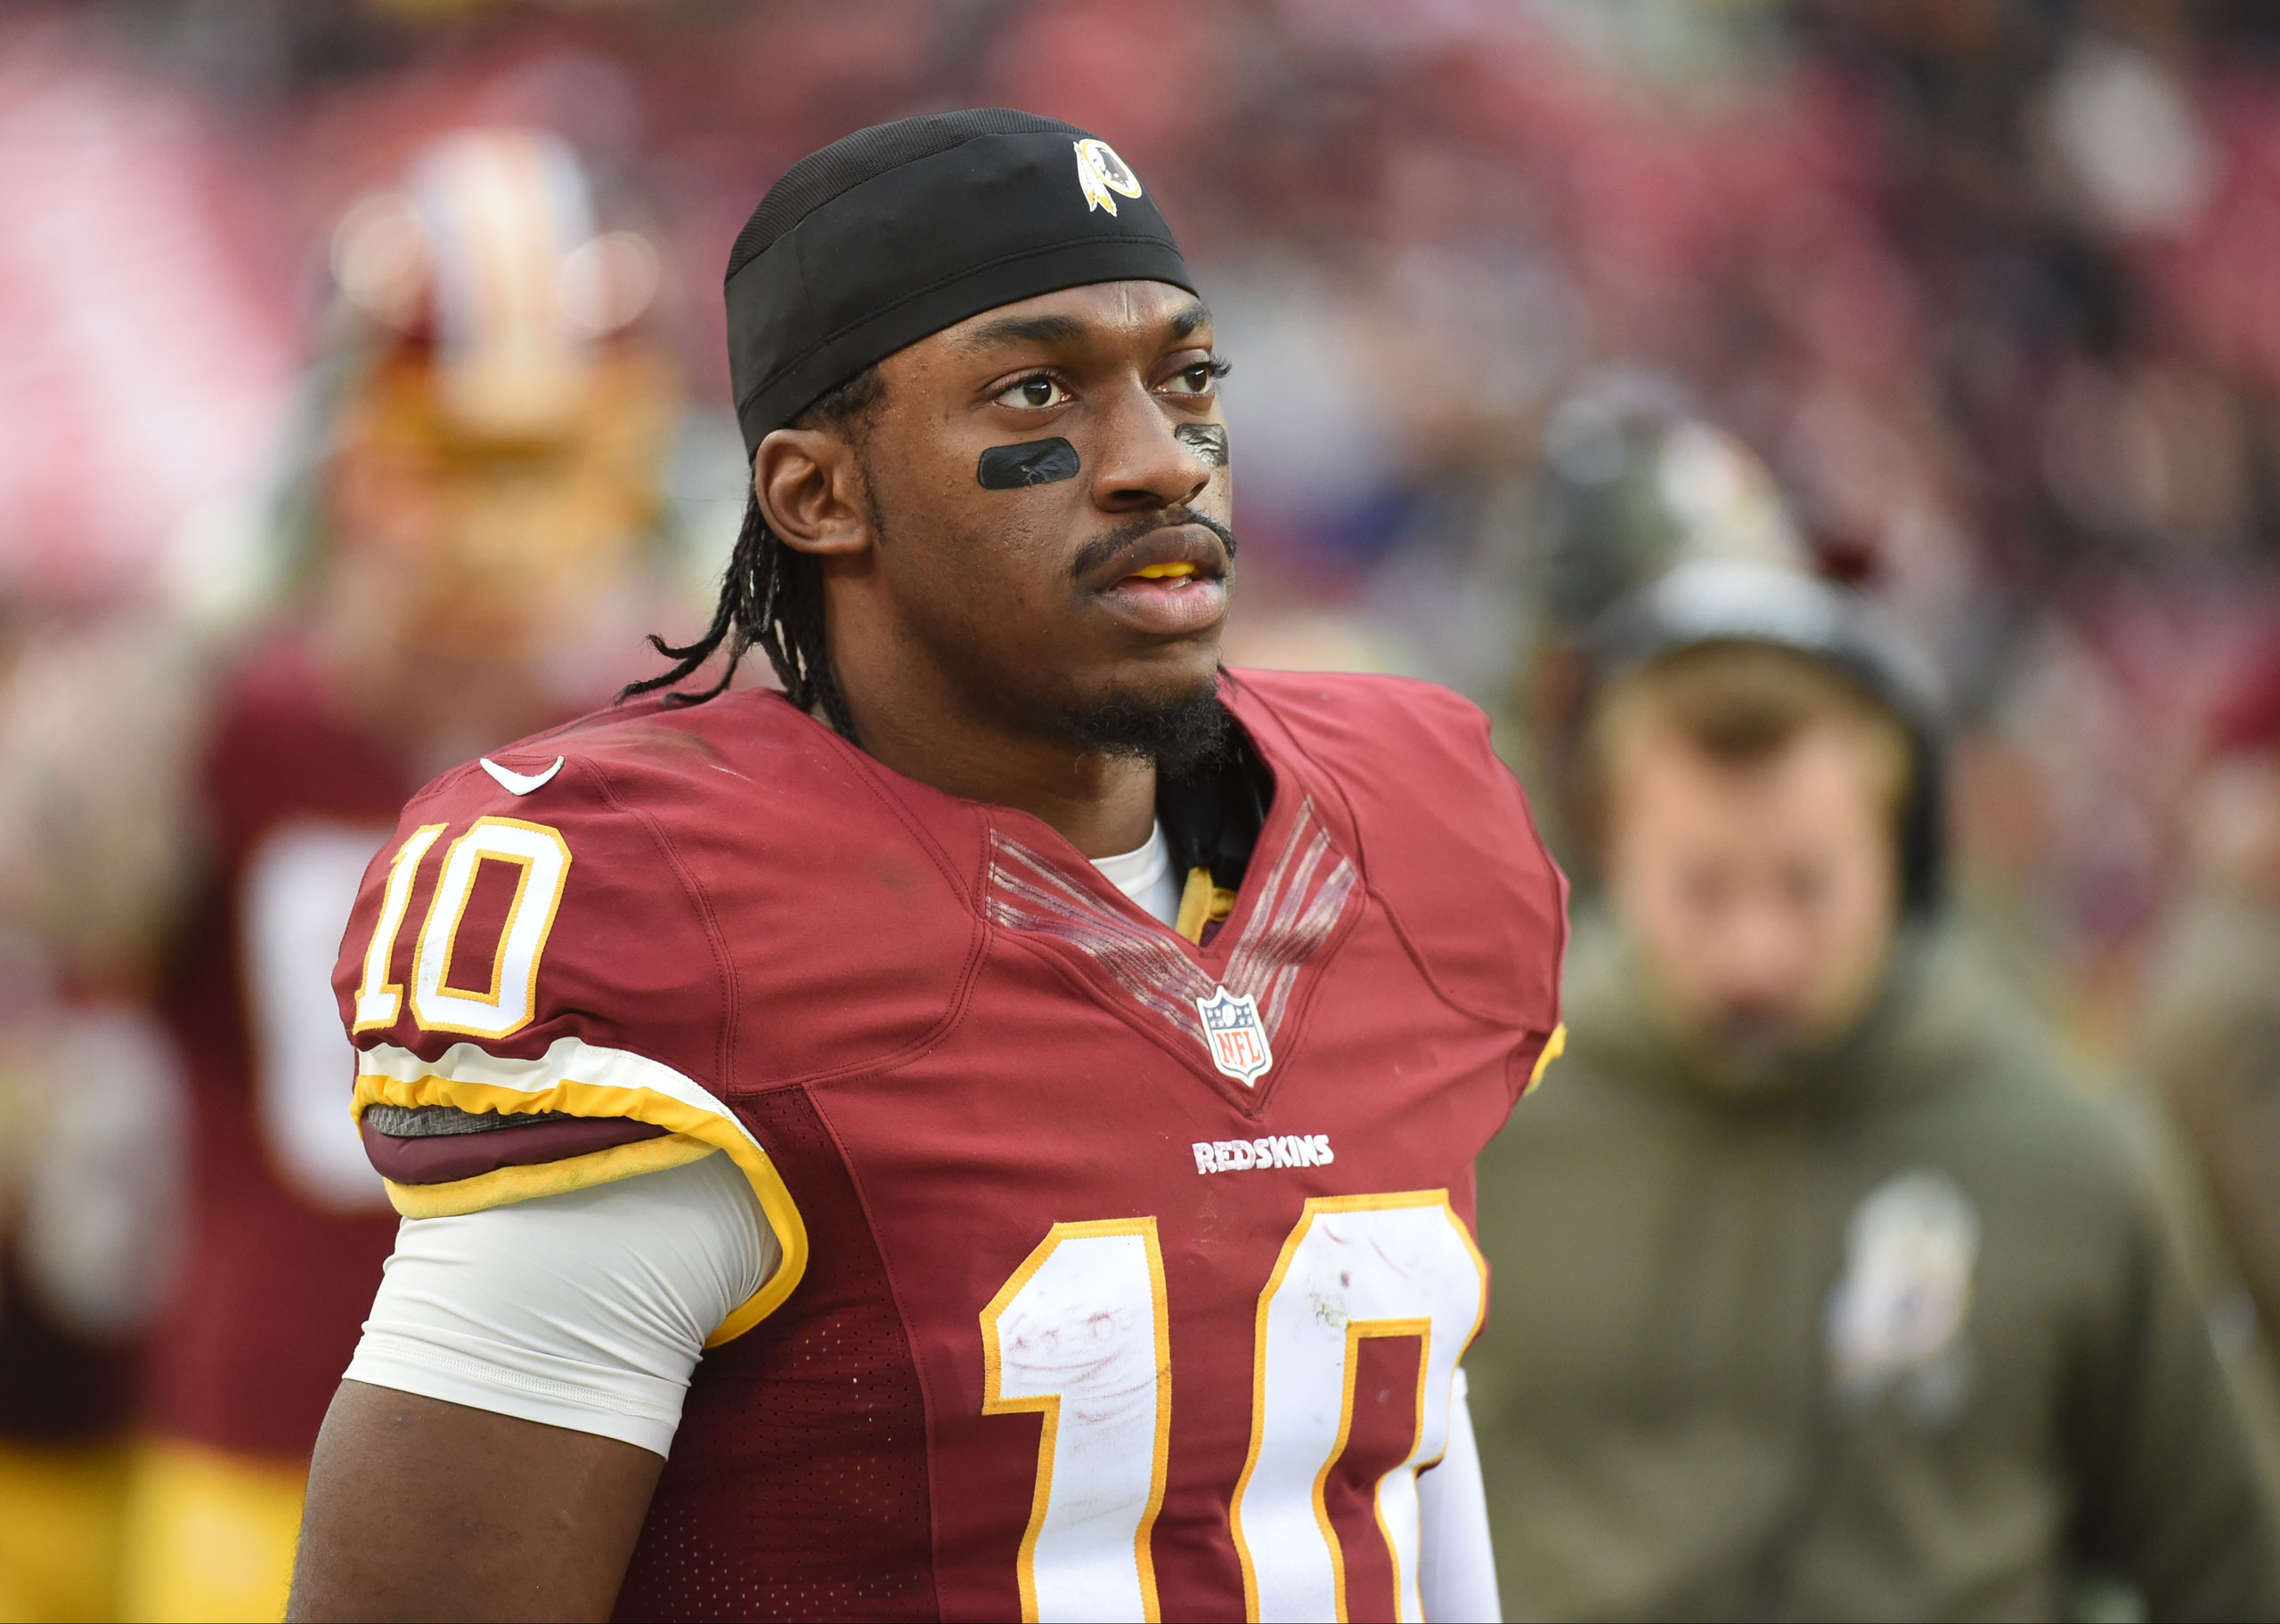 TIME for Thanks: Here's What Robert Griffin III Is Thankful For | Time